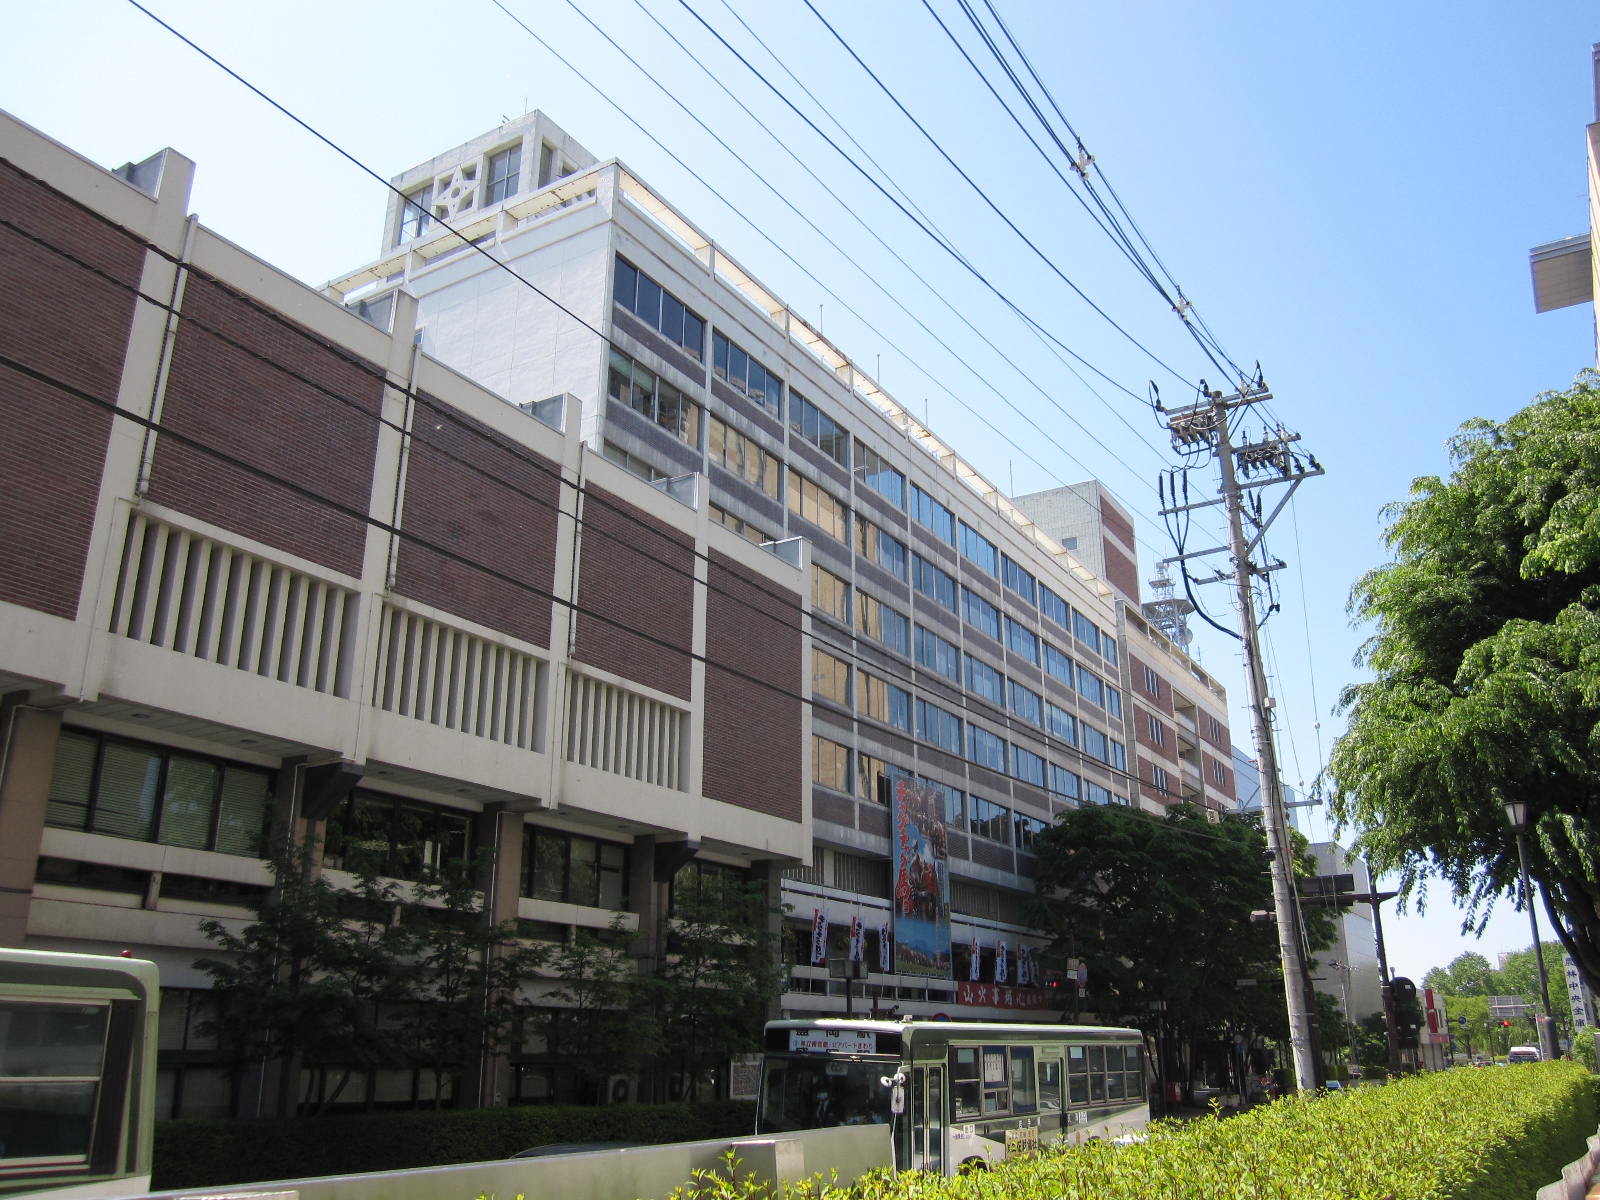 Government office. 299m to Morioka city office (government office)